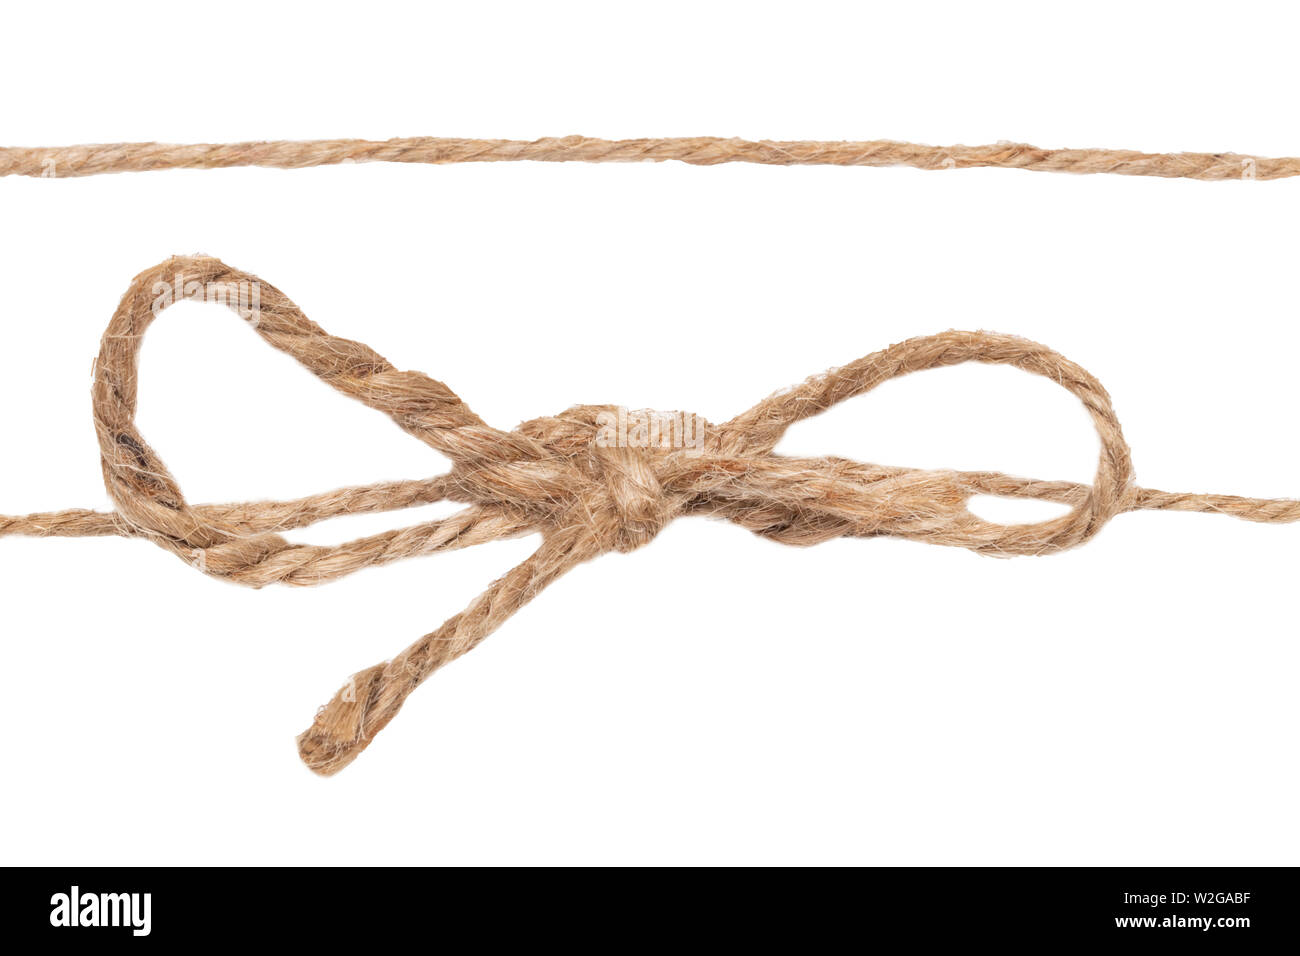 Closeup of twine node or knot with bow and one rope isolated on a